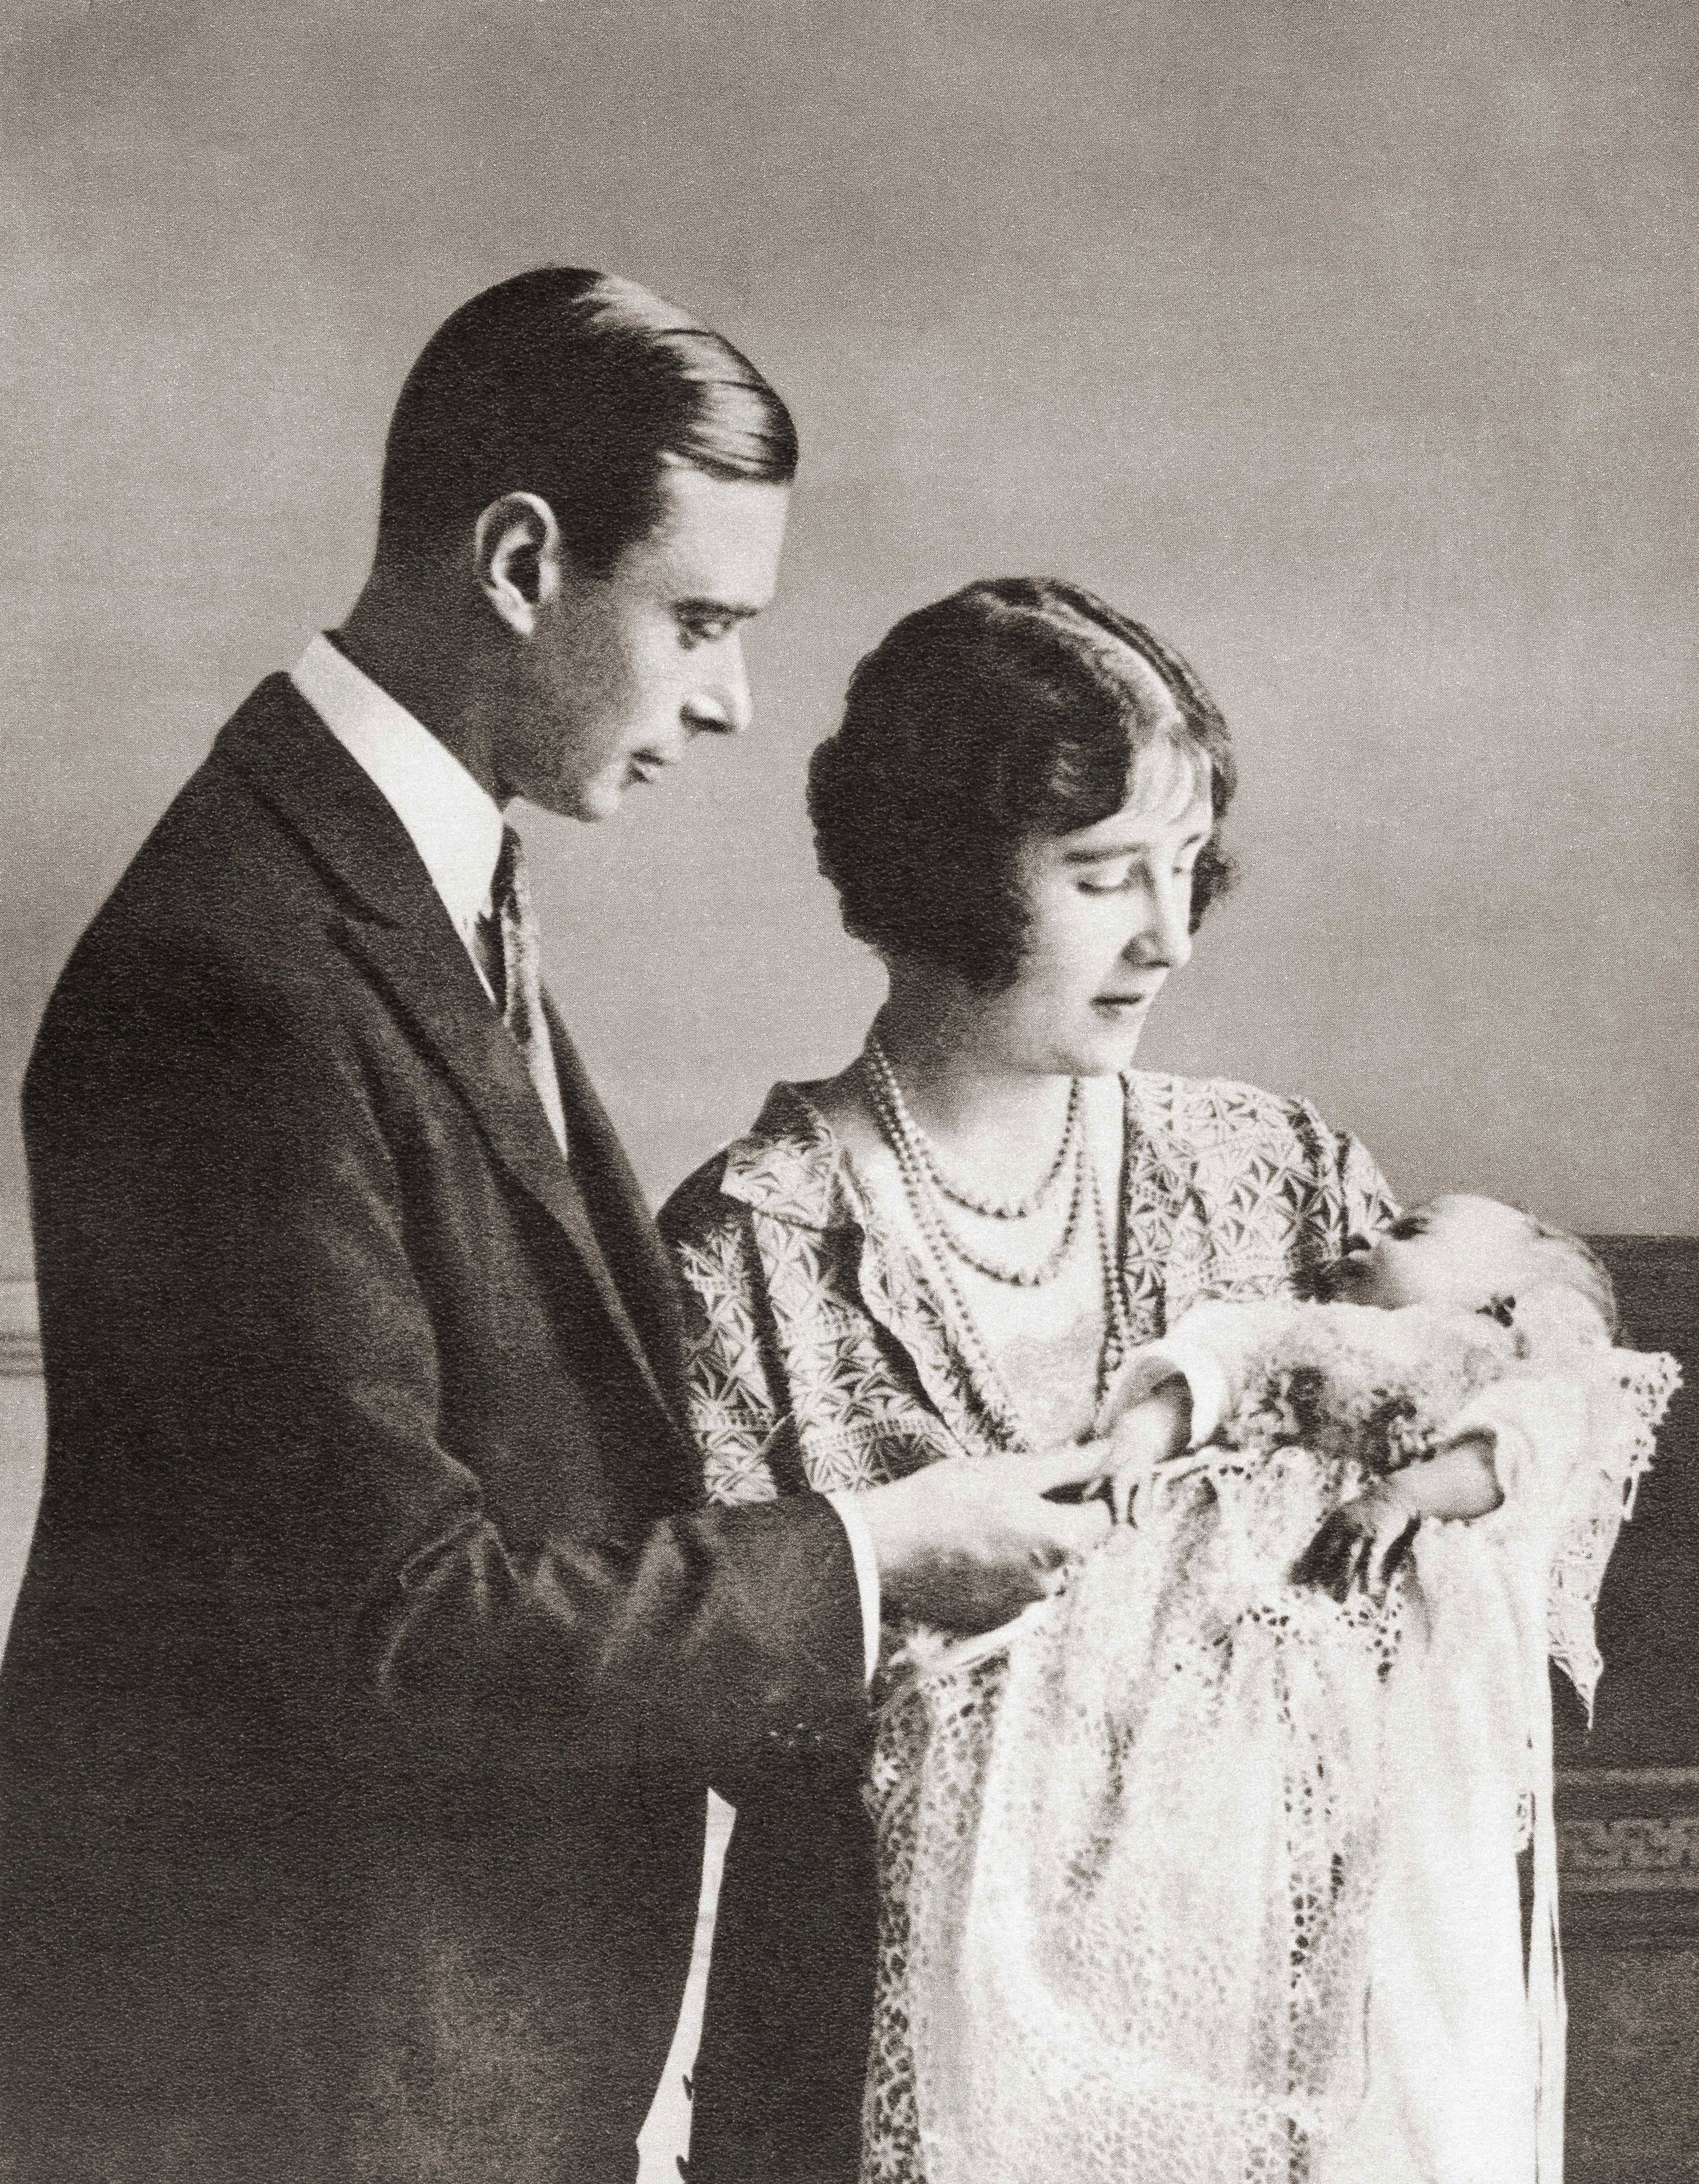 <p>Prince Albert, Duke of York (later King George VI) and wife Elizabeth, Duchess of York (later Queen Elizabeth, then Elizabeth the Queen Mother) posed for a portrait with baby daughter Princess Elizabeth -- the future Queen Elizabeth II -- at her christening in 1926. </p><p>MORE: <a href="https://www.wonderwall.com/celebrity/photos/royal-christening-baptism-photos-britain-sweden-greece-spain-monaco-norway-denmark-netherlands-royal-families-historical-3015197.gallery">The best photos from royal christenings through the decades</a></p>